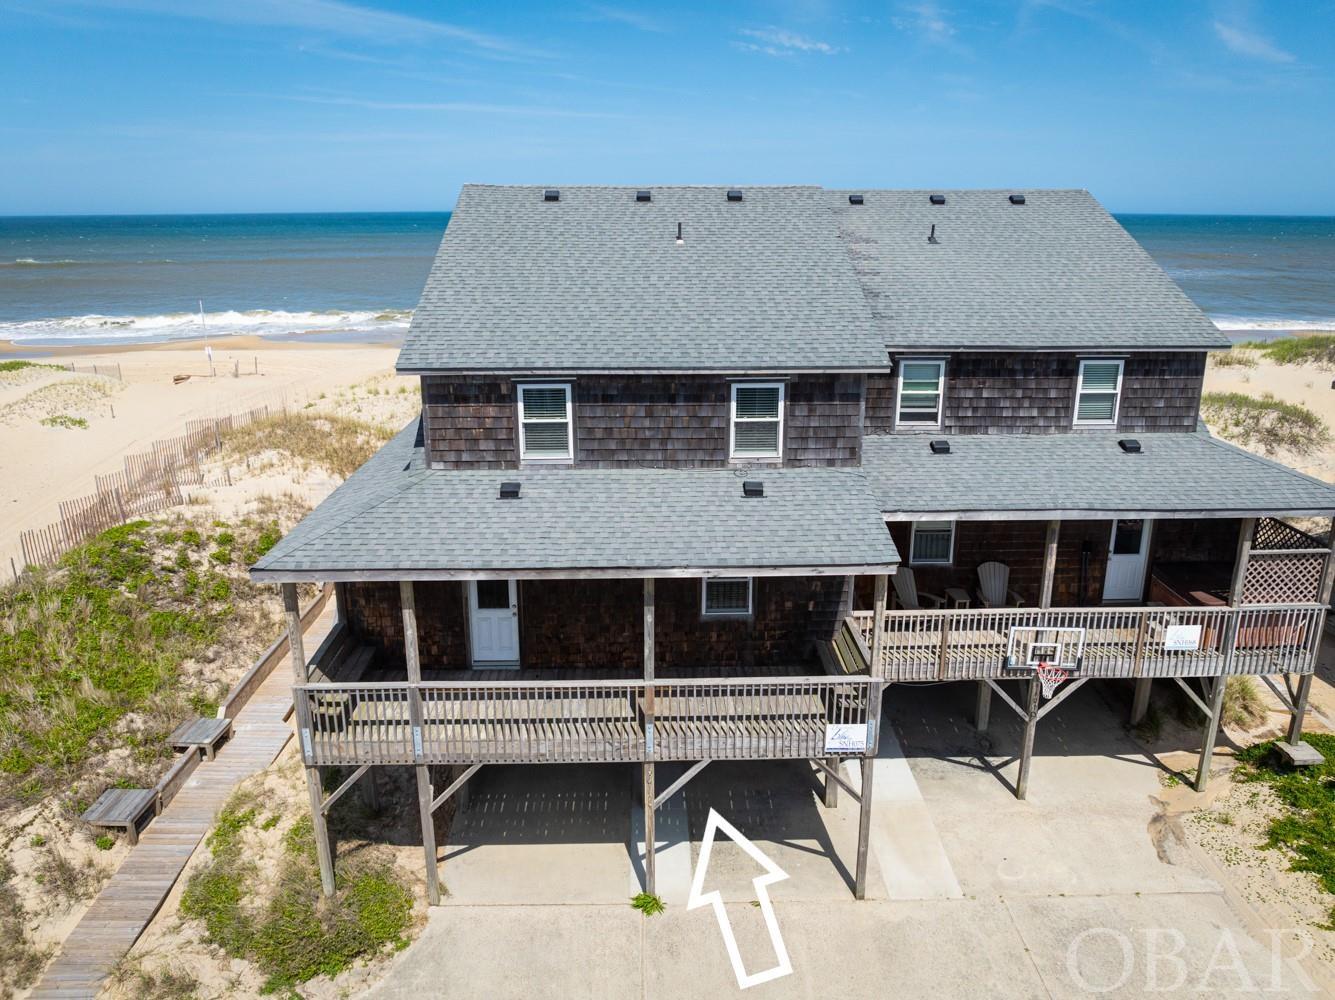 Enjoy everything quaint South Nags Head has to offer in this oceanfront property with beautiful ocean views. On the ground level you will find a dry entry, outdoor shower, and new hot tub in a private patio area for year-round enjoyment. Upon entering the main level you will find a spacious living room, dining area, kitchen, full bathroom, one bedroom, a private deck off the kitchen area, and plenty of east facing deck space to enjoy even more of the great views. The top level boasts a primary suite with a private porch and large tub, two additional bedrooms, and a bathroom. Property has been well maintained and some of the recent updates include new LVP flooring, fresh paint throughout, and new furnishings. Located adjacent to a lifeguard stand at Juncos St. in the summer months.